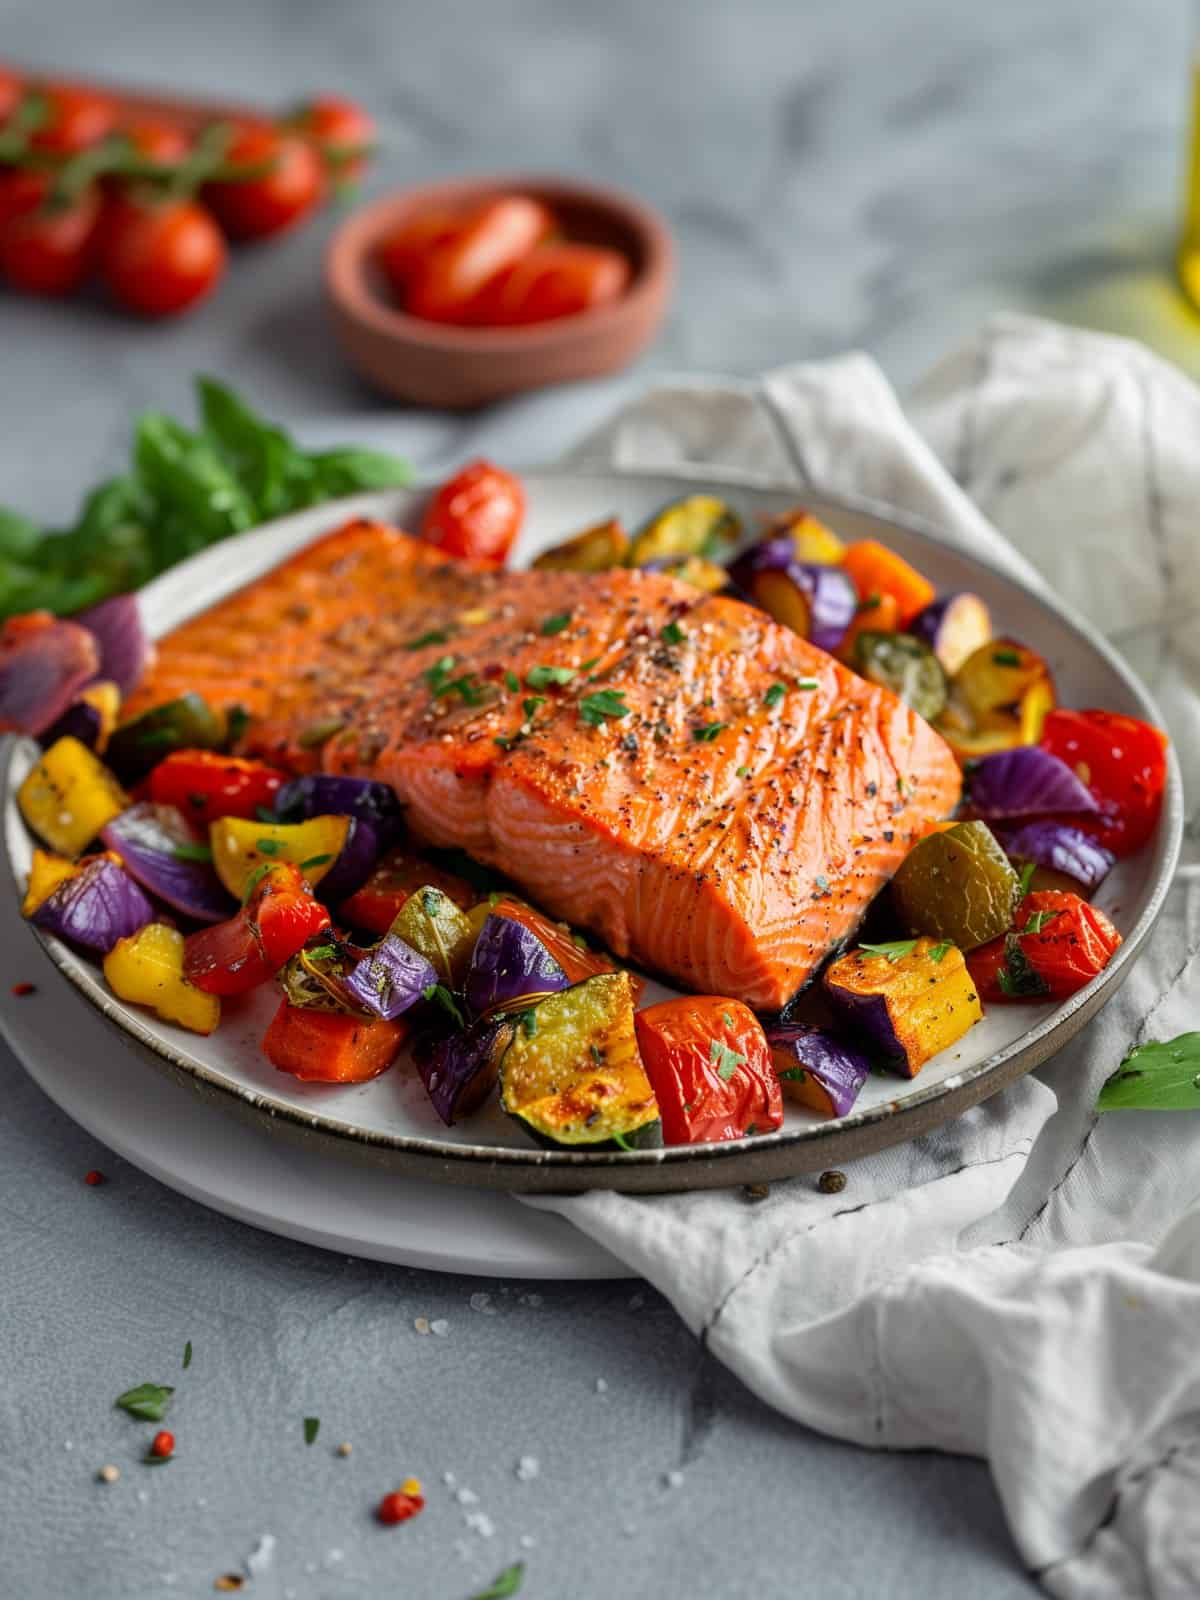 grilled salmon on baked vegetables